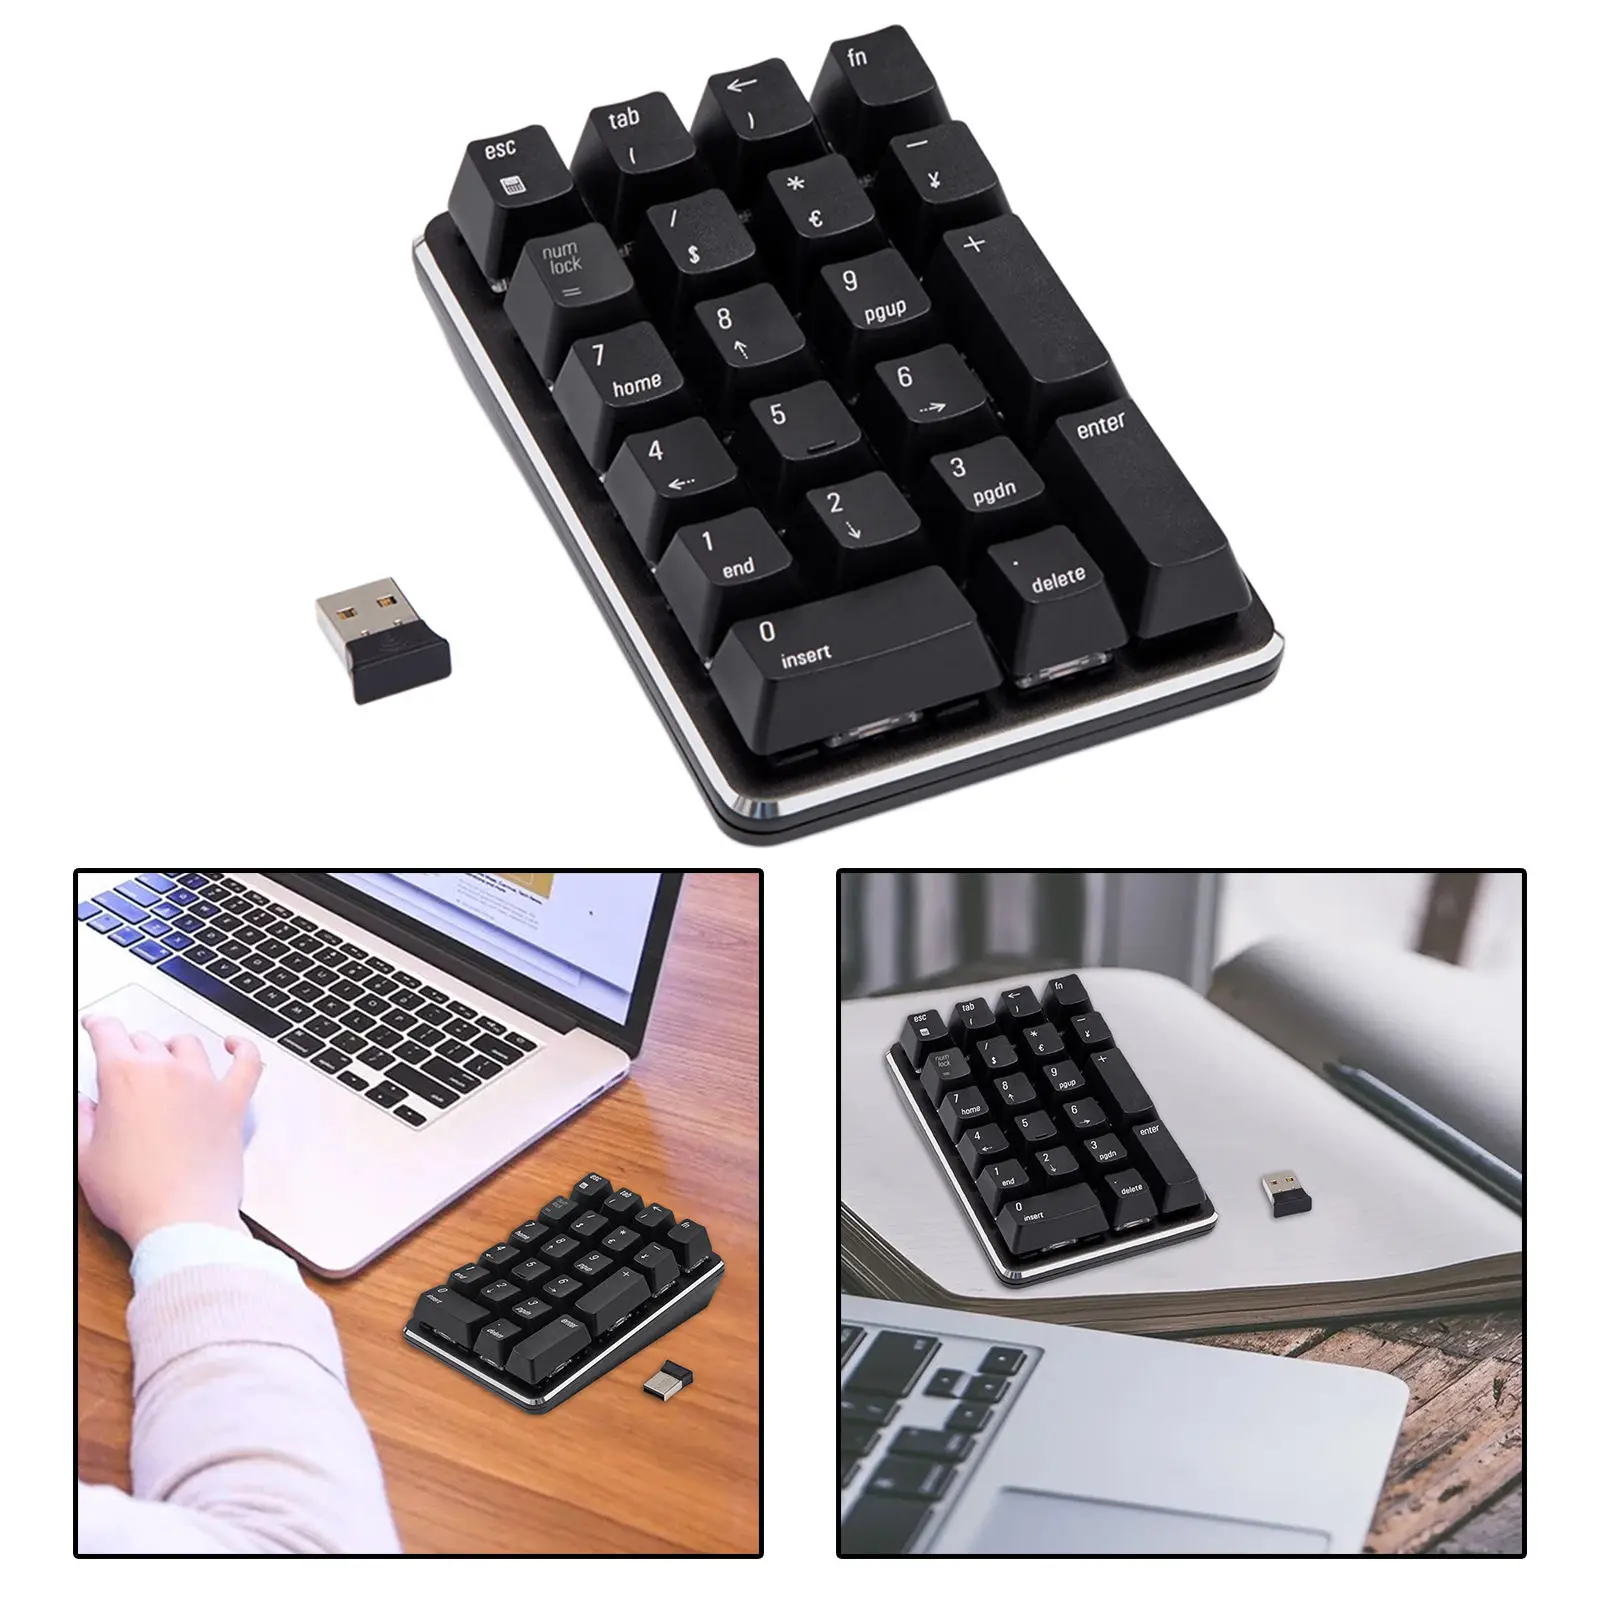 types of computer keyboard Compact, Mini, Smart 2.4G Wireless, Mechanical 21 Keys, Mini Numpad Gaming Keyboard ,for Laptop /Notebook /Tablets Black types of computer keyboard